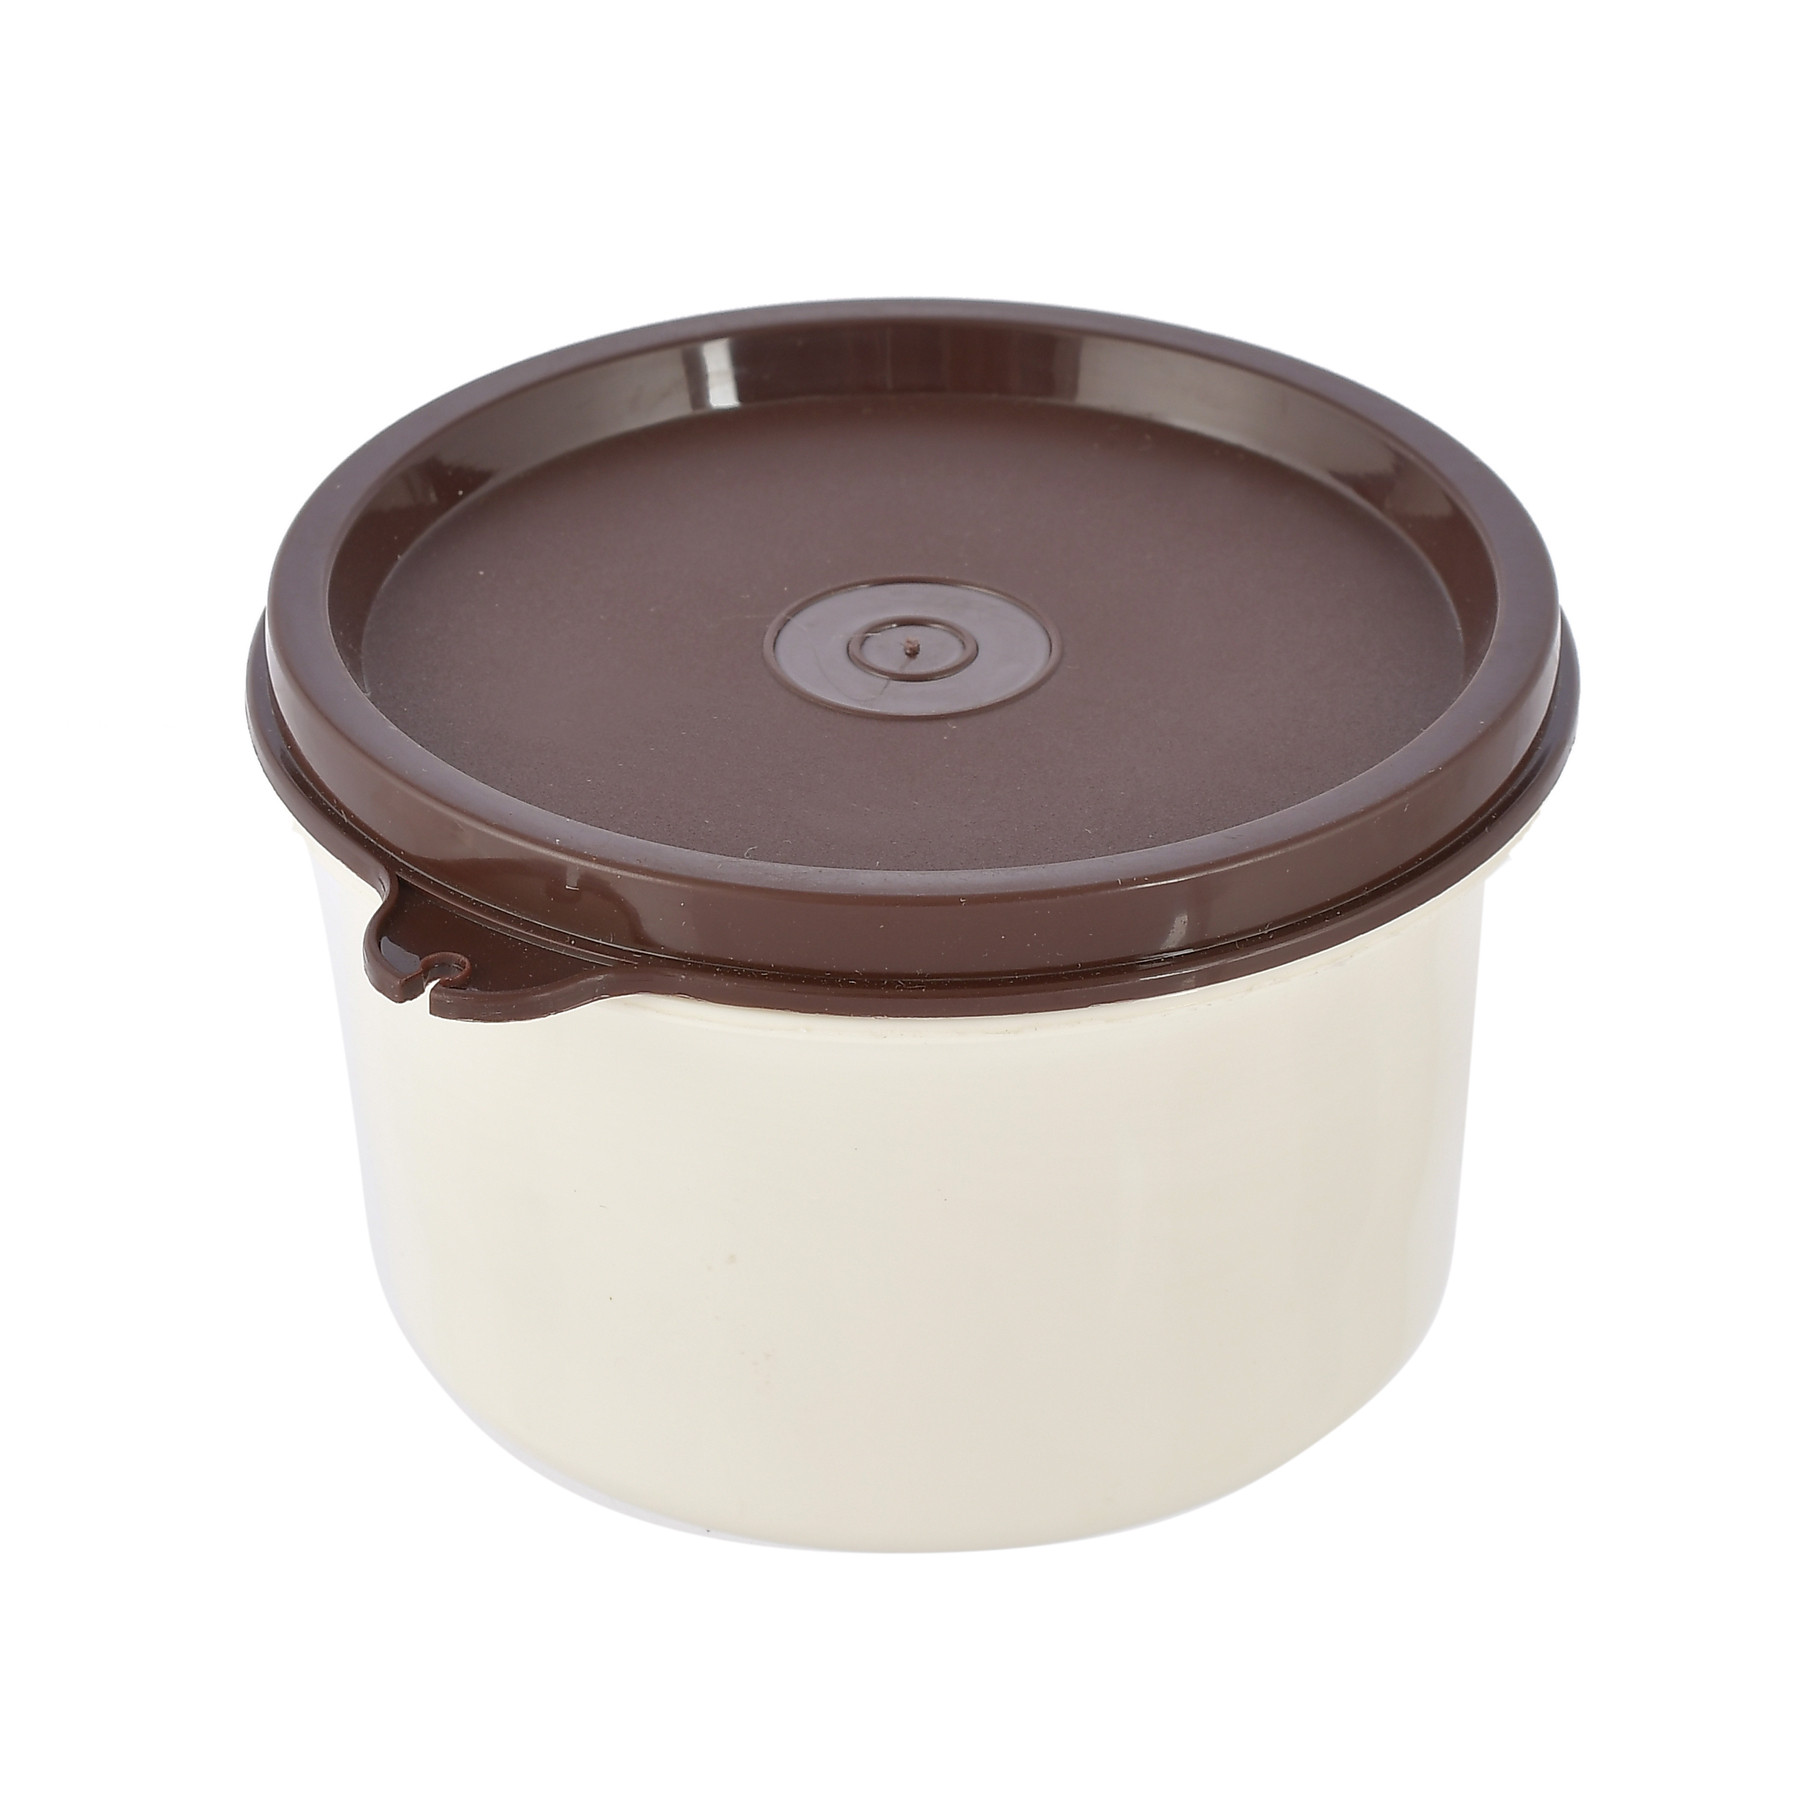 Kuber Industries BPA Free Food Grade Microwave Safe Inner Steel Lunch Containers Set, Set of 2 (Cream & Brown)-HS42KUBMART25141